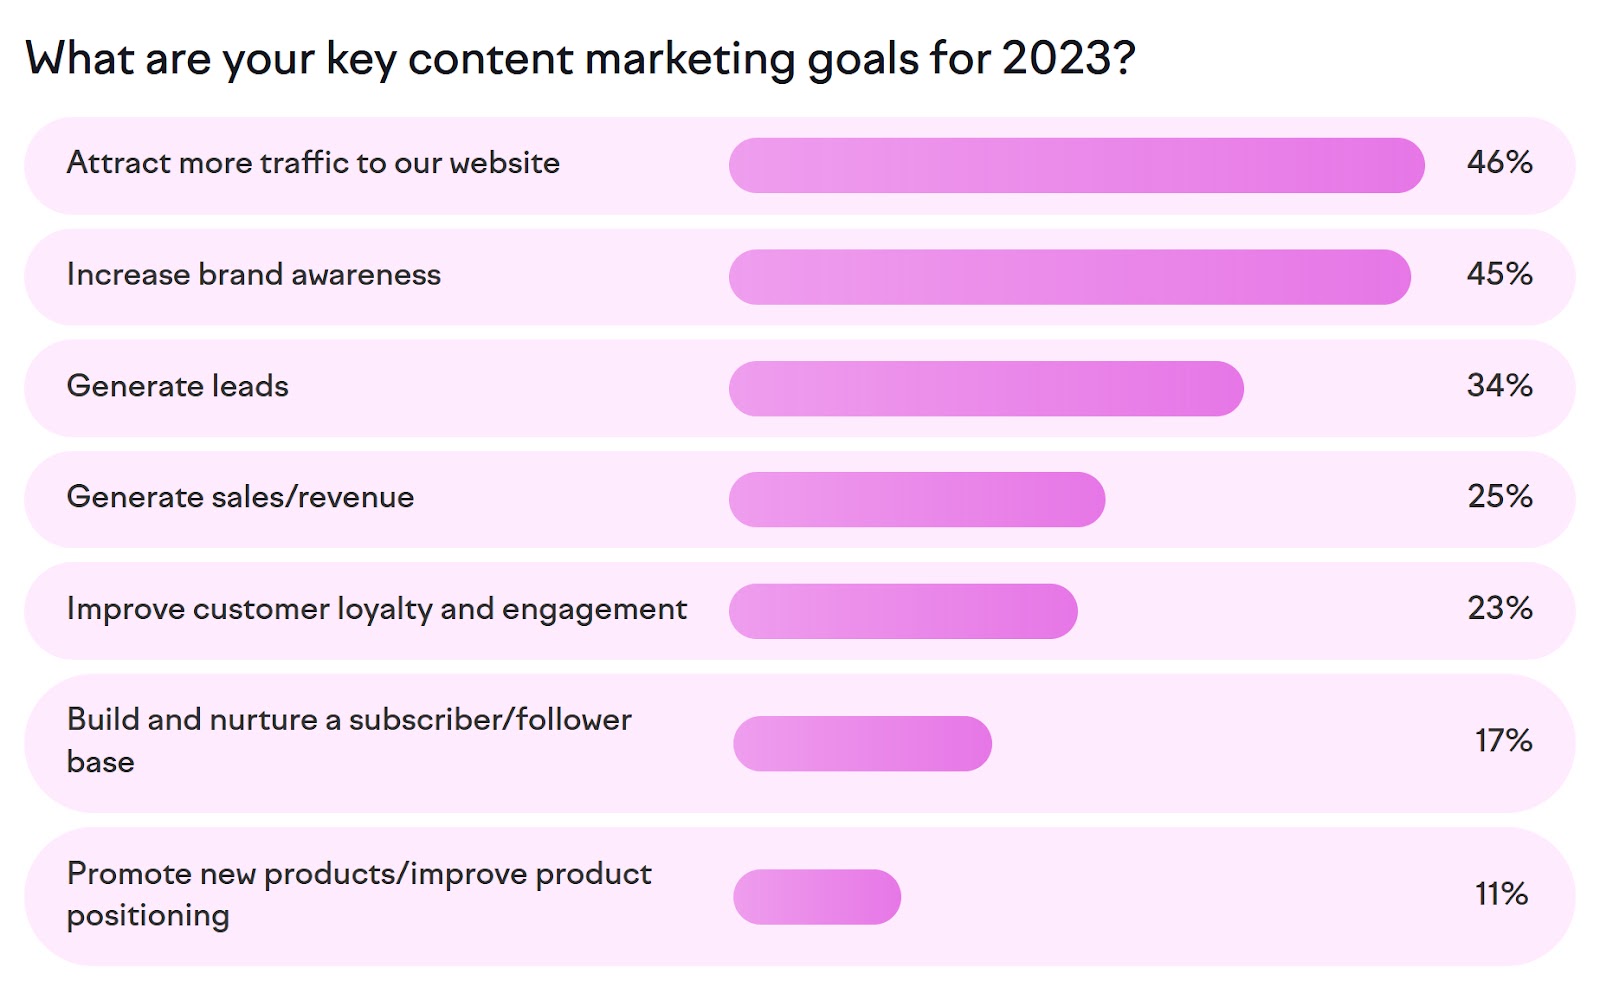 Answers to "What are your key content marketing goals for 2023?" from State of Content Marketing Report